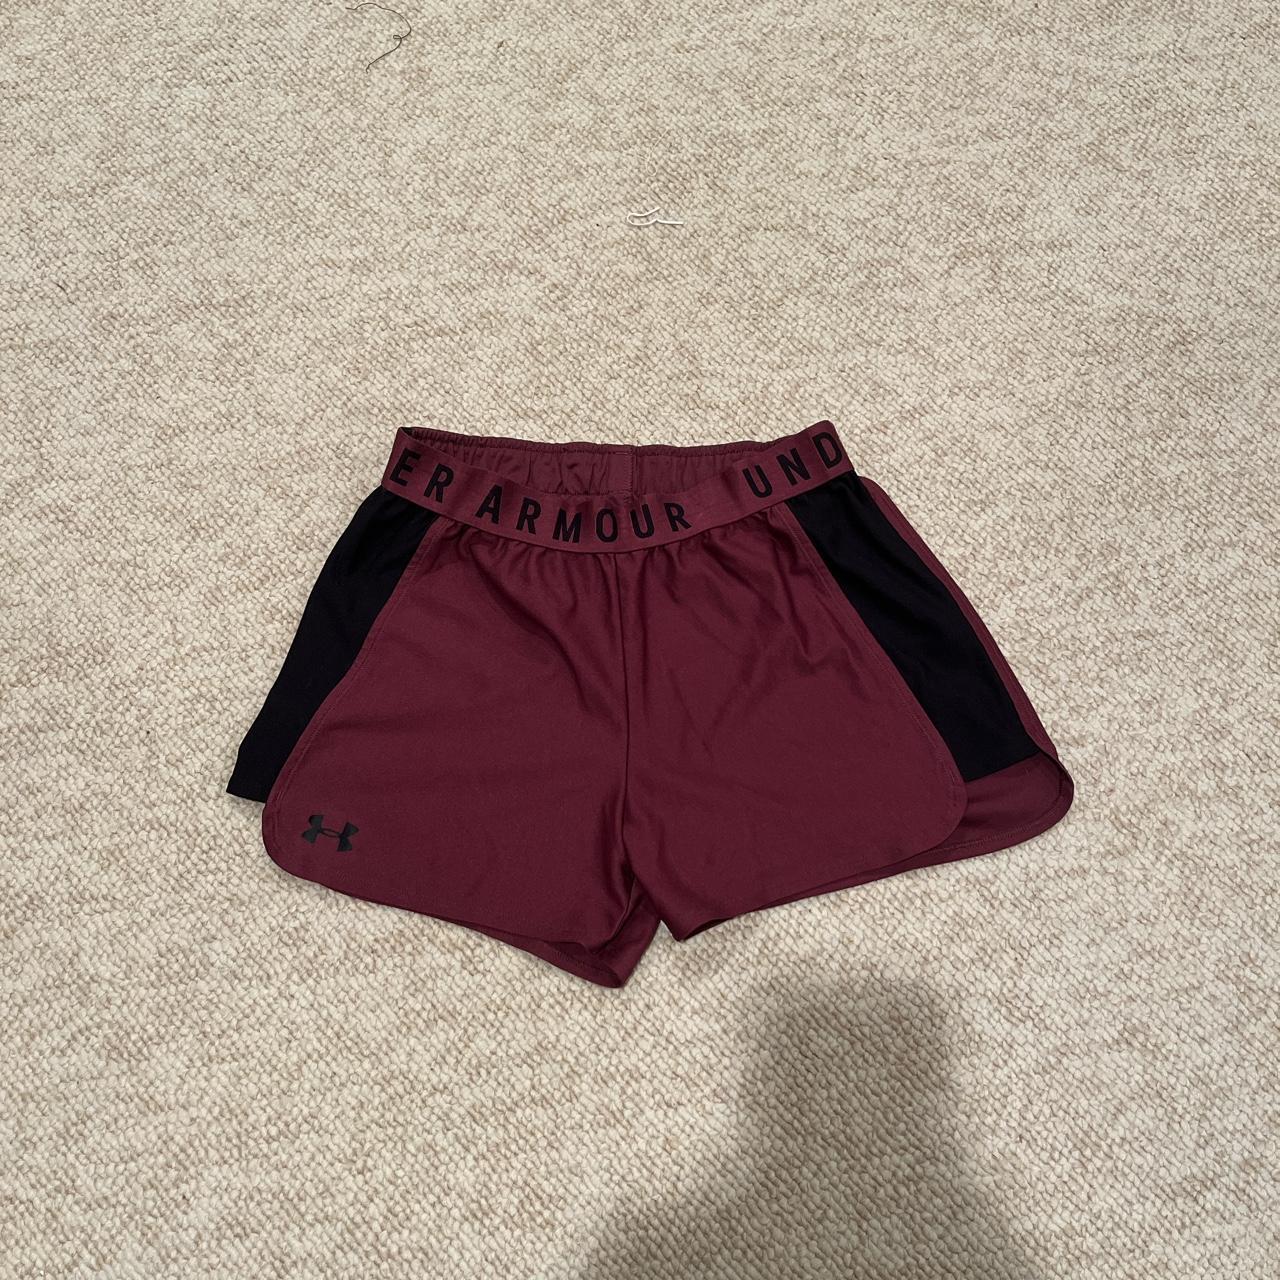 Small women's UNDER ARMOUR maroon and black athletic - Depop